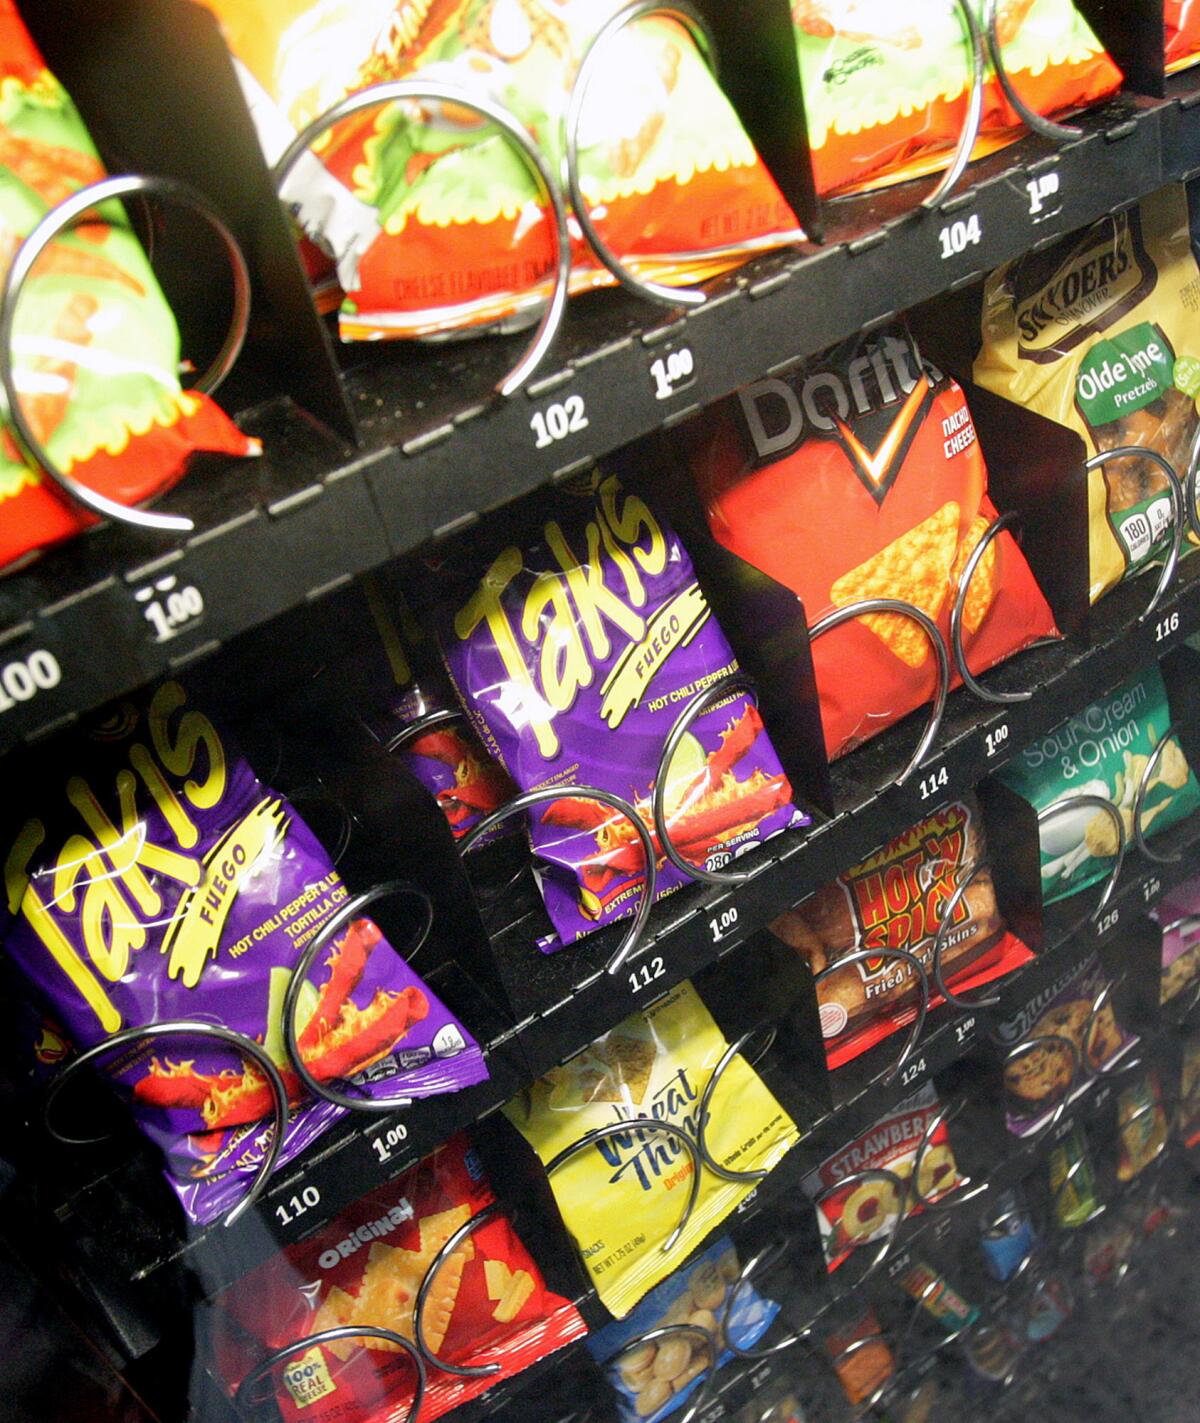 Glendale makes about $500,000 a year from vending machines at parks and other spots such as the Pacific Community Center, and staffers acknowledge that revenue could fall by as much as 40% because of healthier offerings.